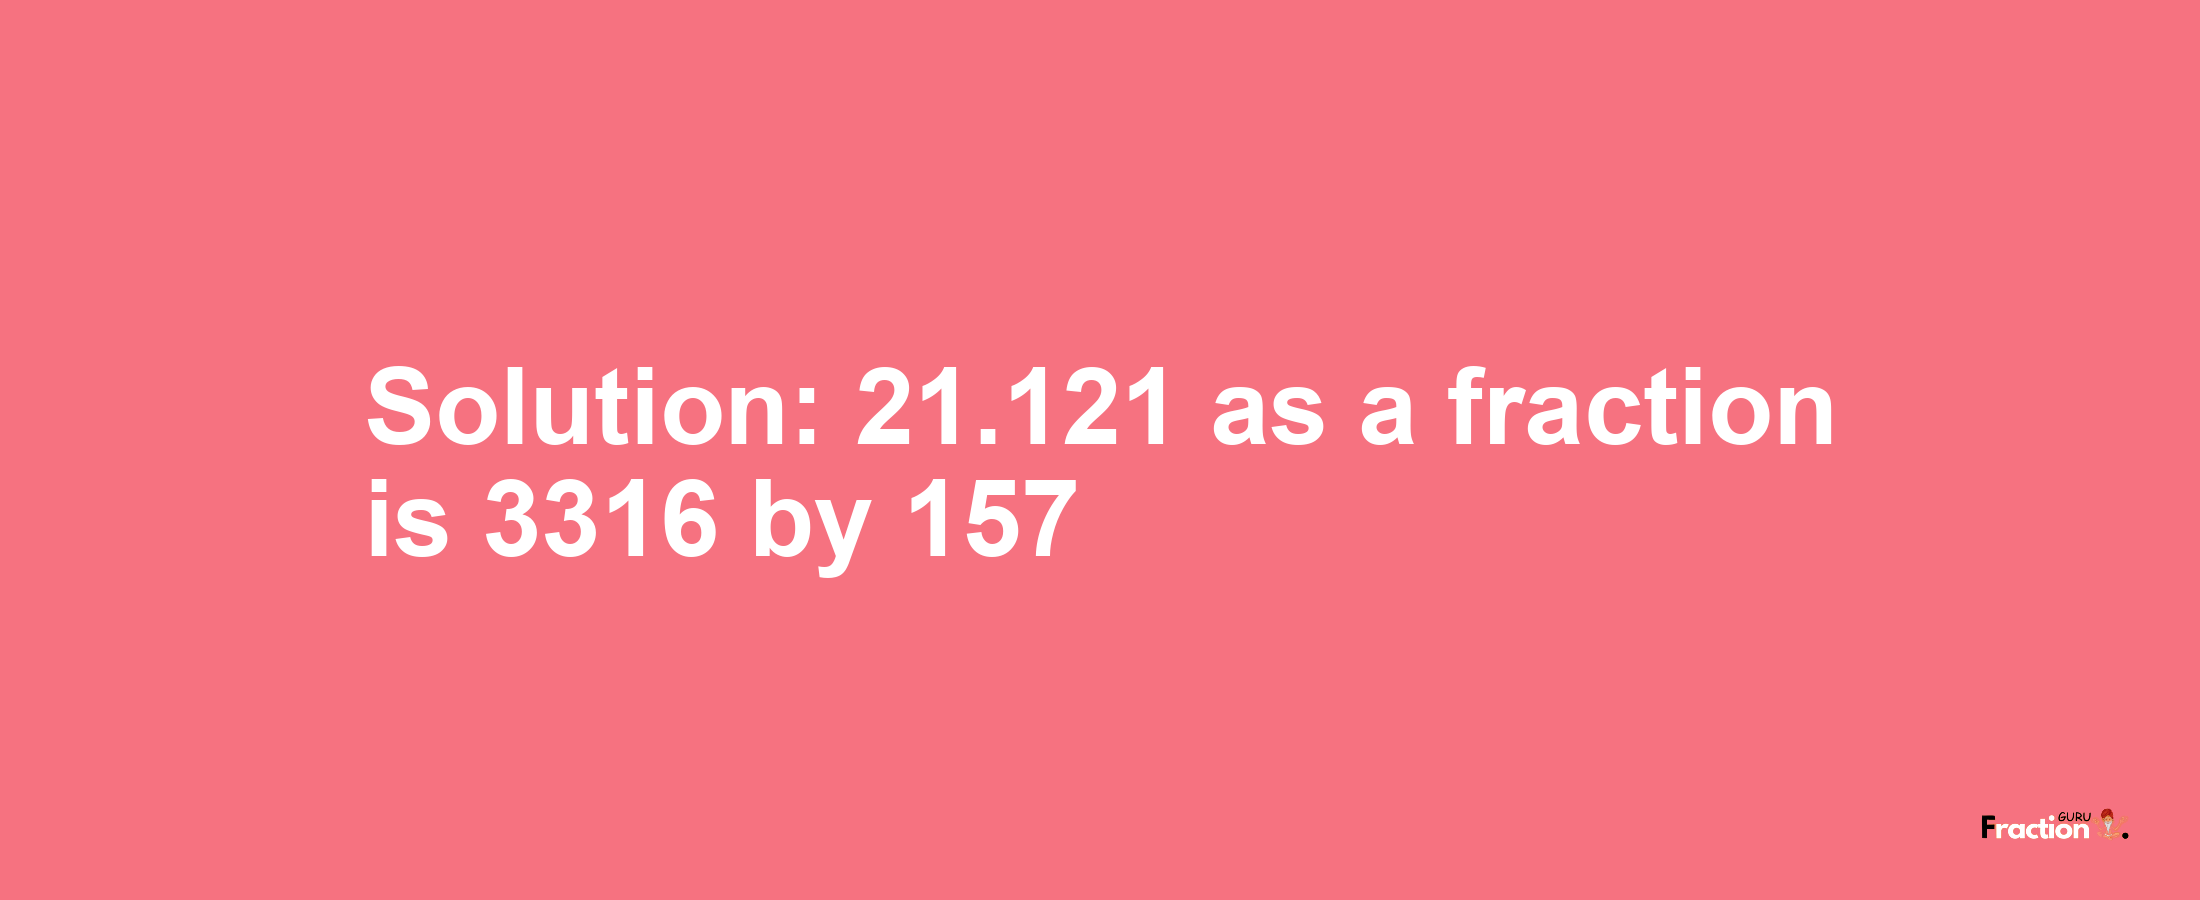 Solution:21.121 as a fraction is 3316/157